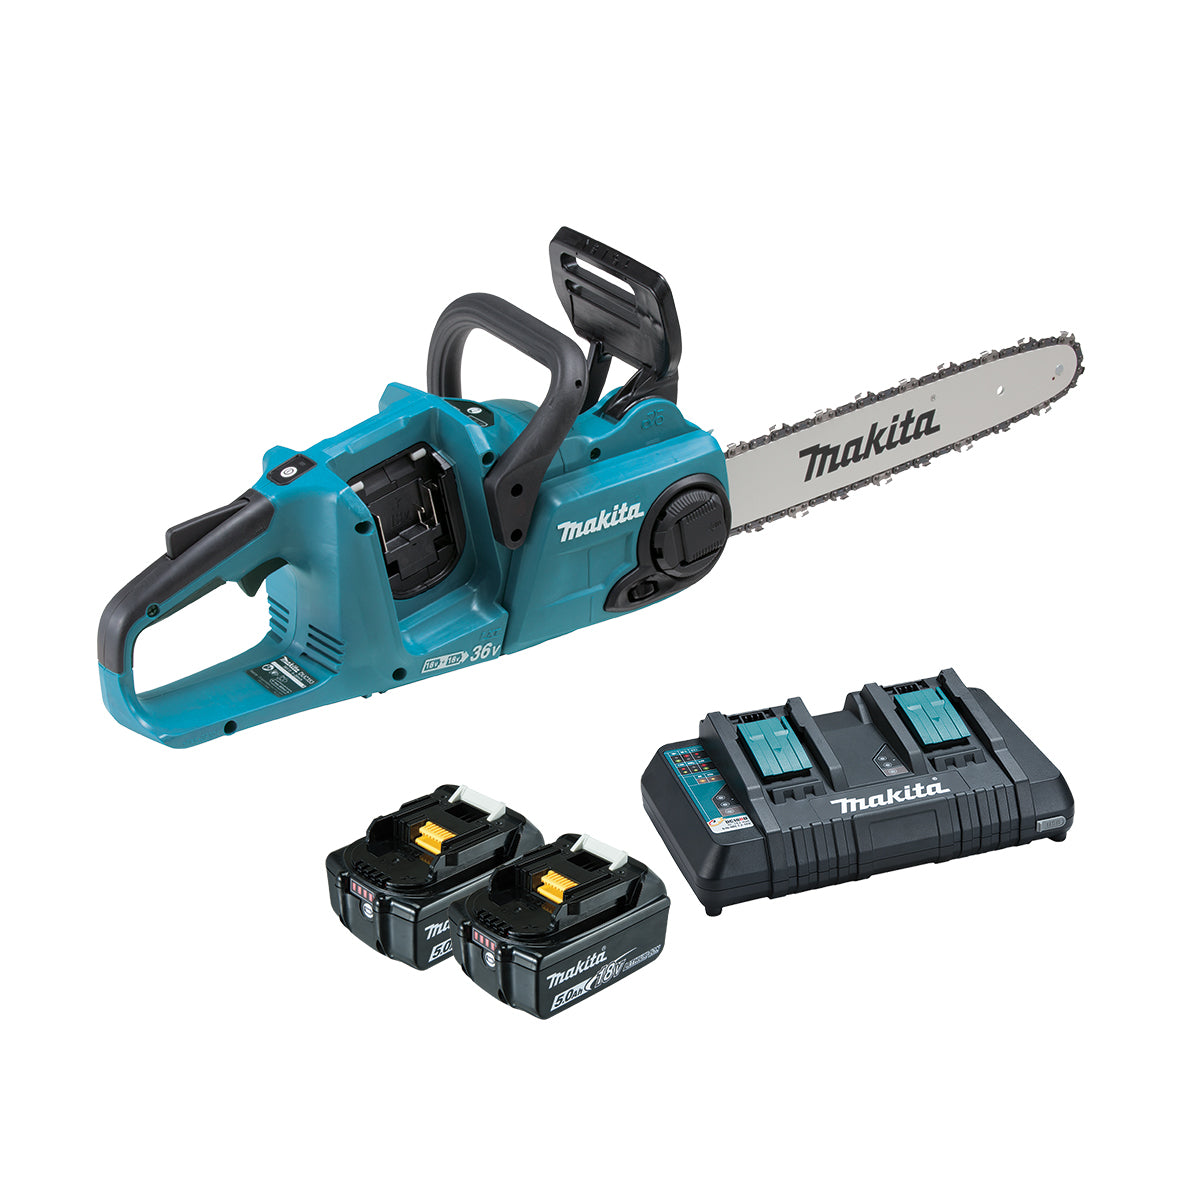 18Vx2 350mm (14") Chainsaw Kit DUC353PT2 by Makita